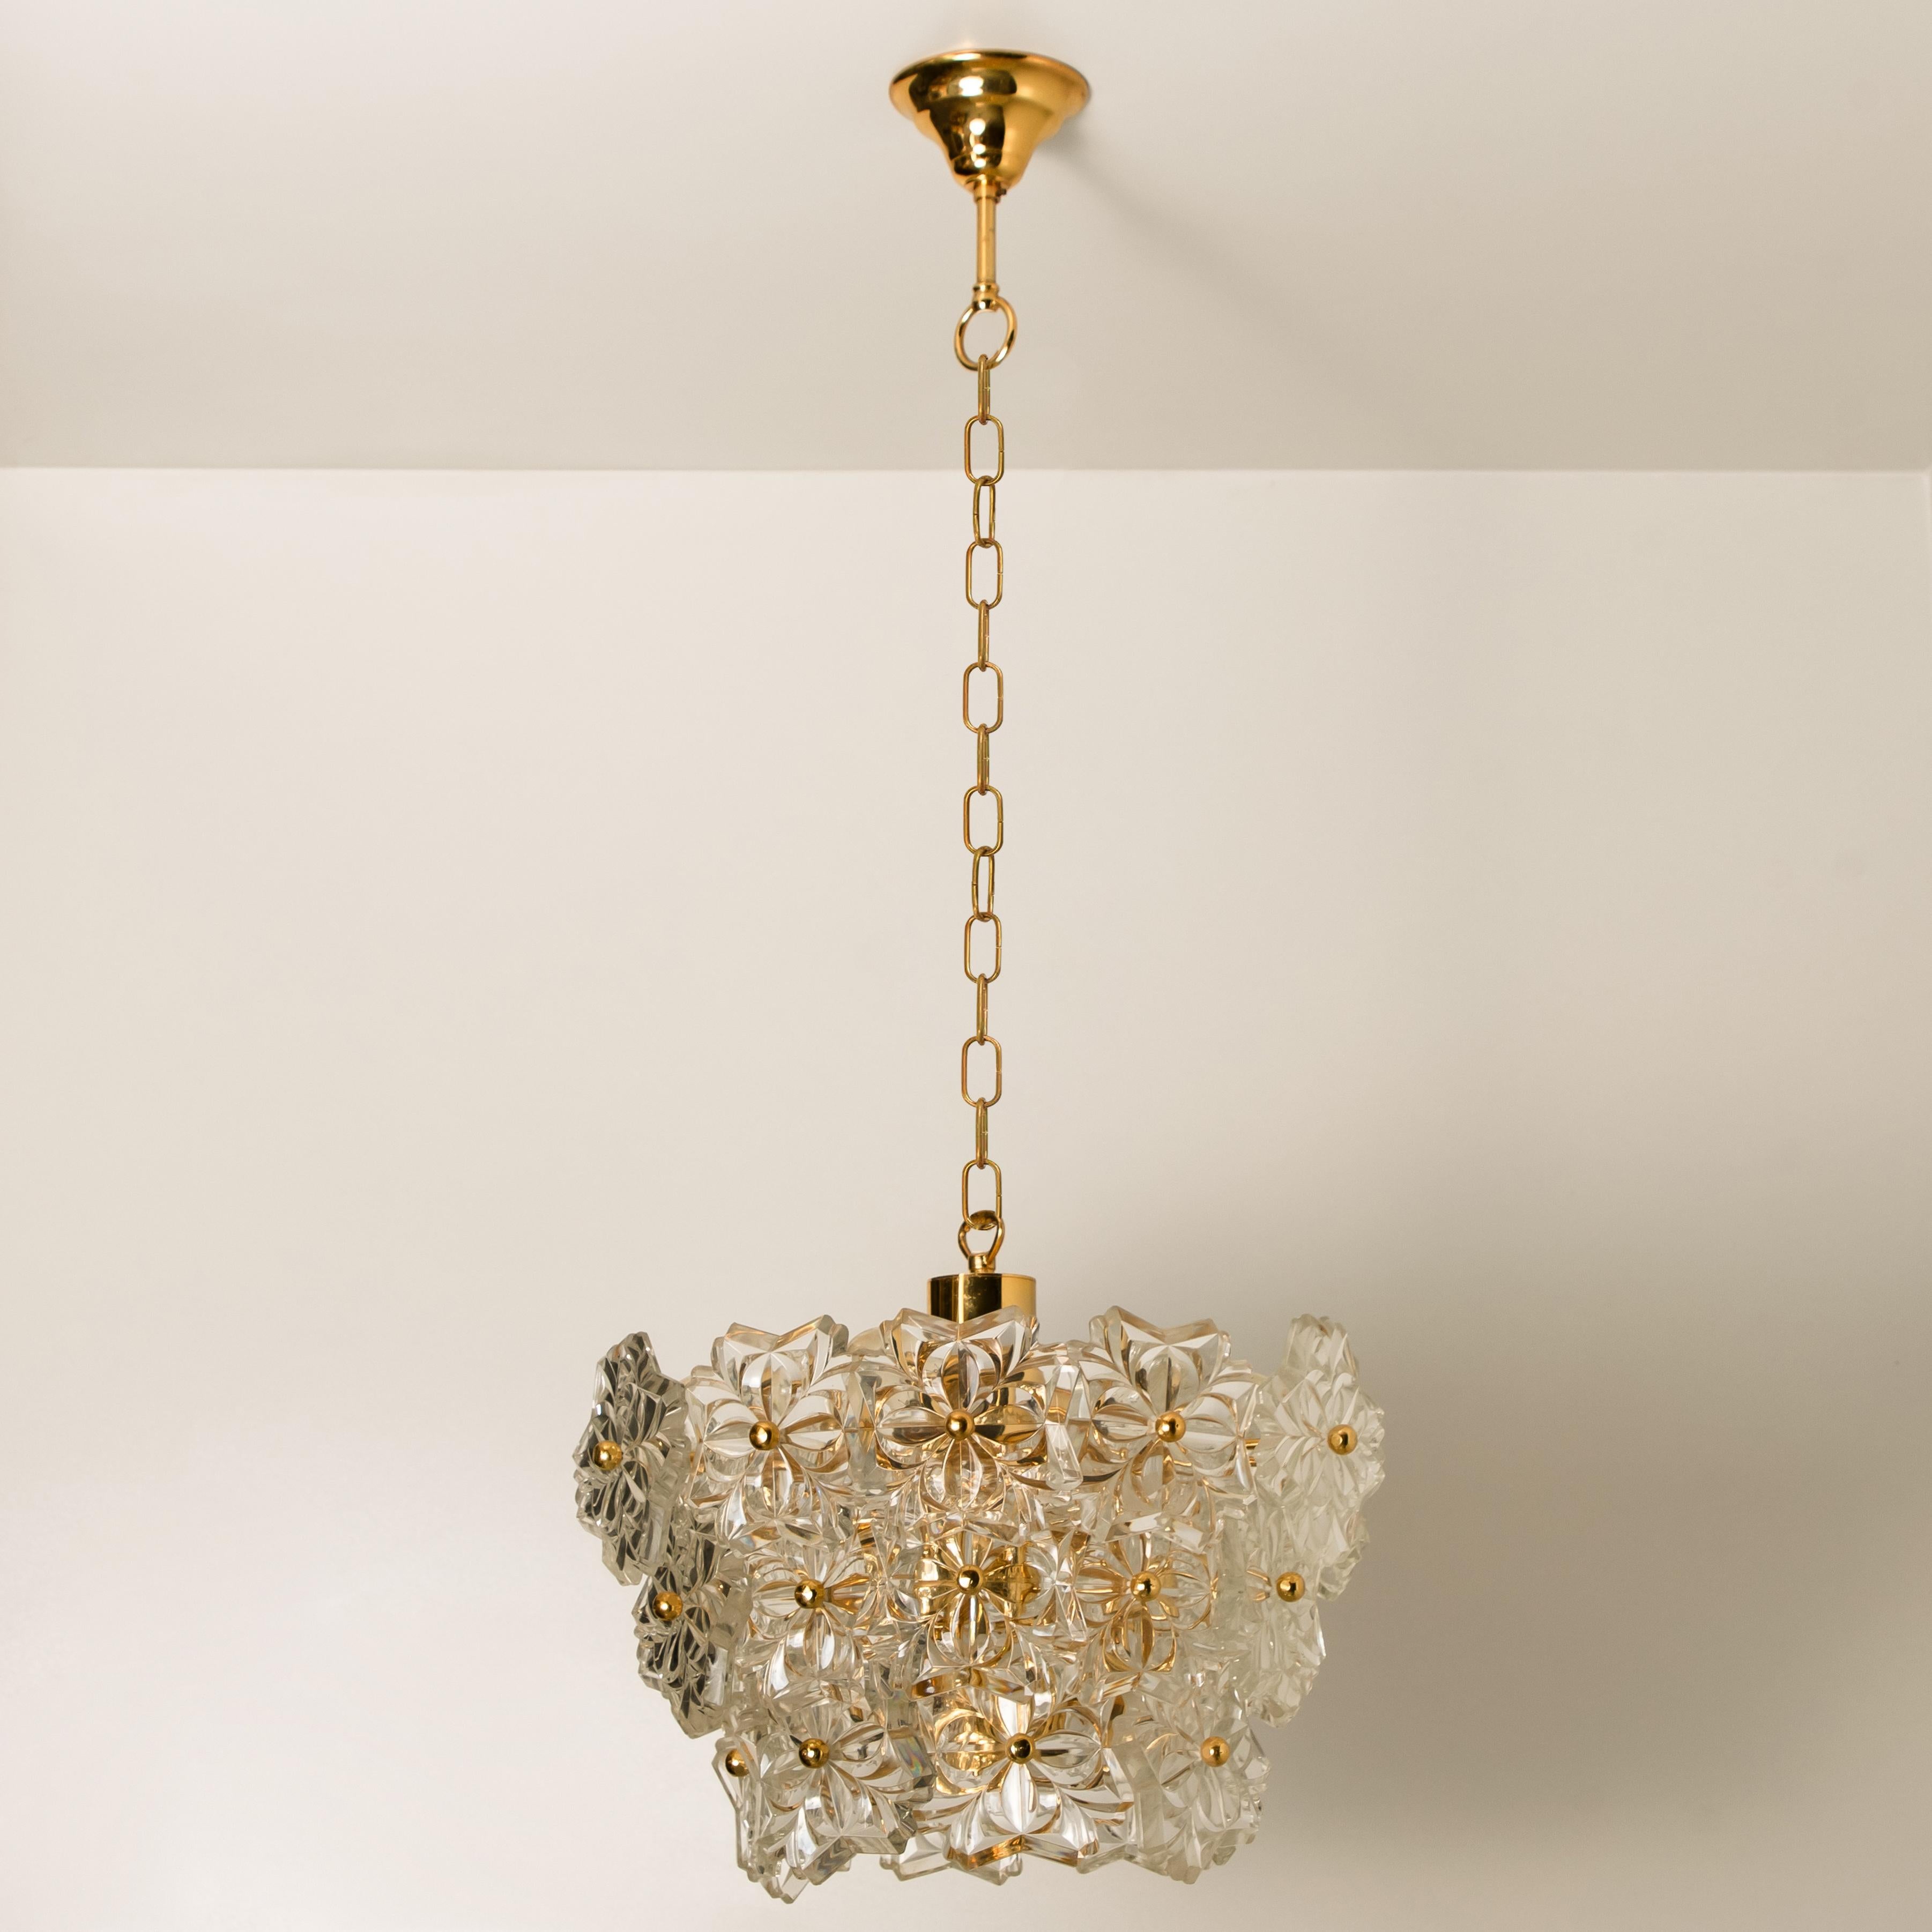 1 of the 2 Glass and Brass Floral Three Tiers Light Fixtures, 1970s For Sale 6